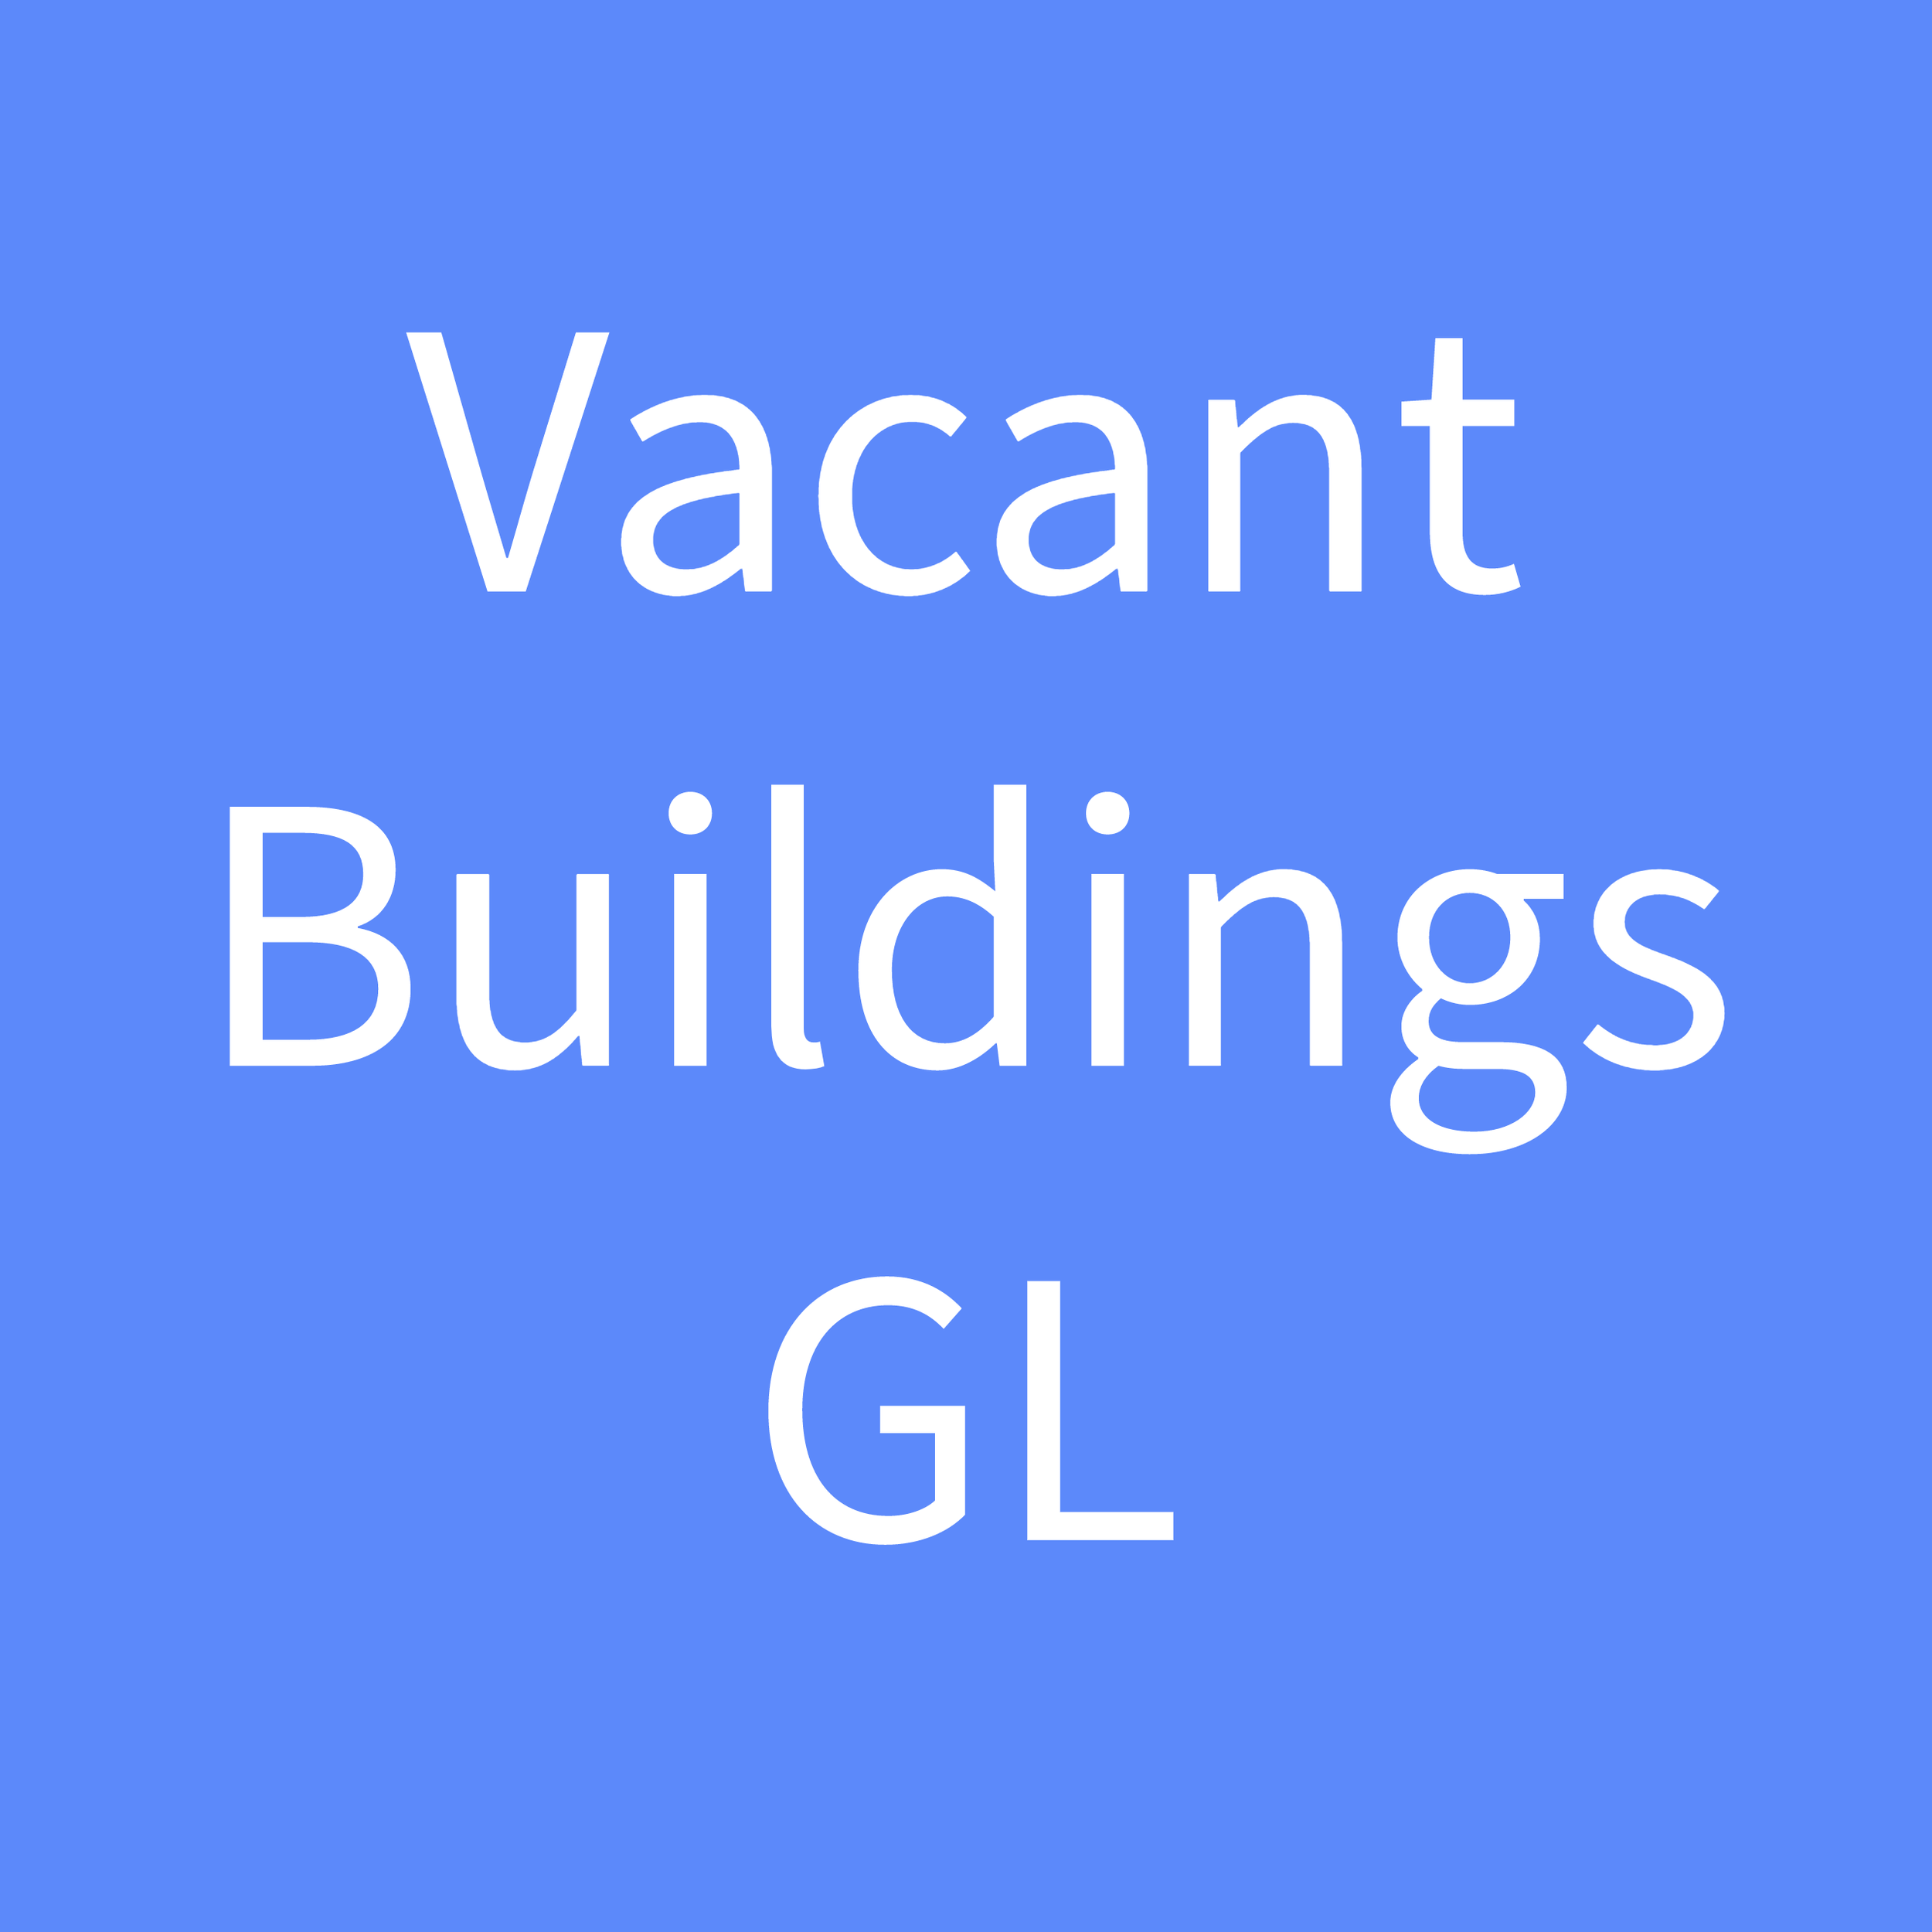 Vacant Buildings GL